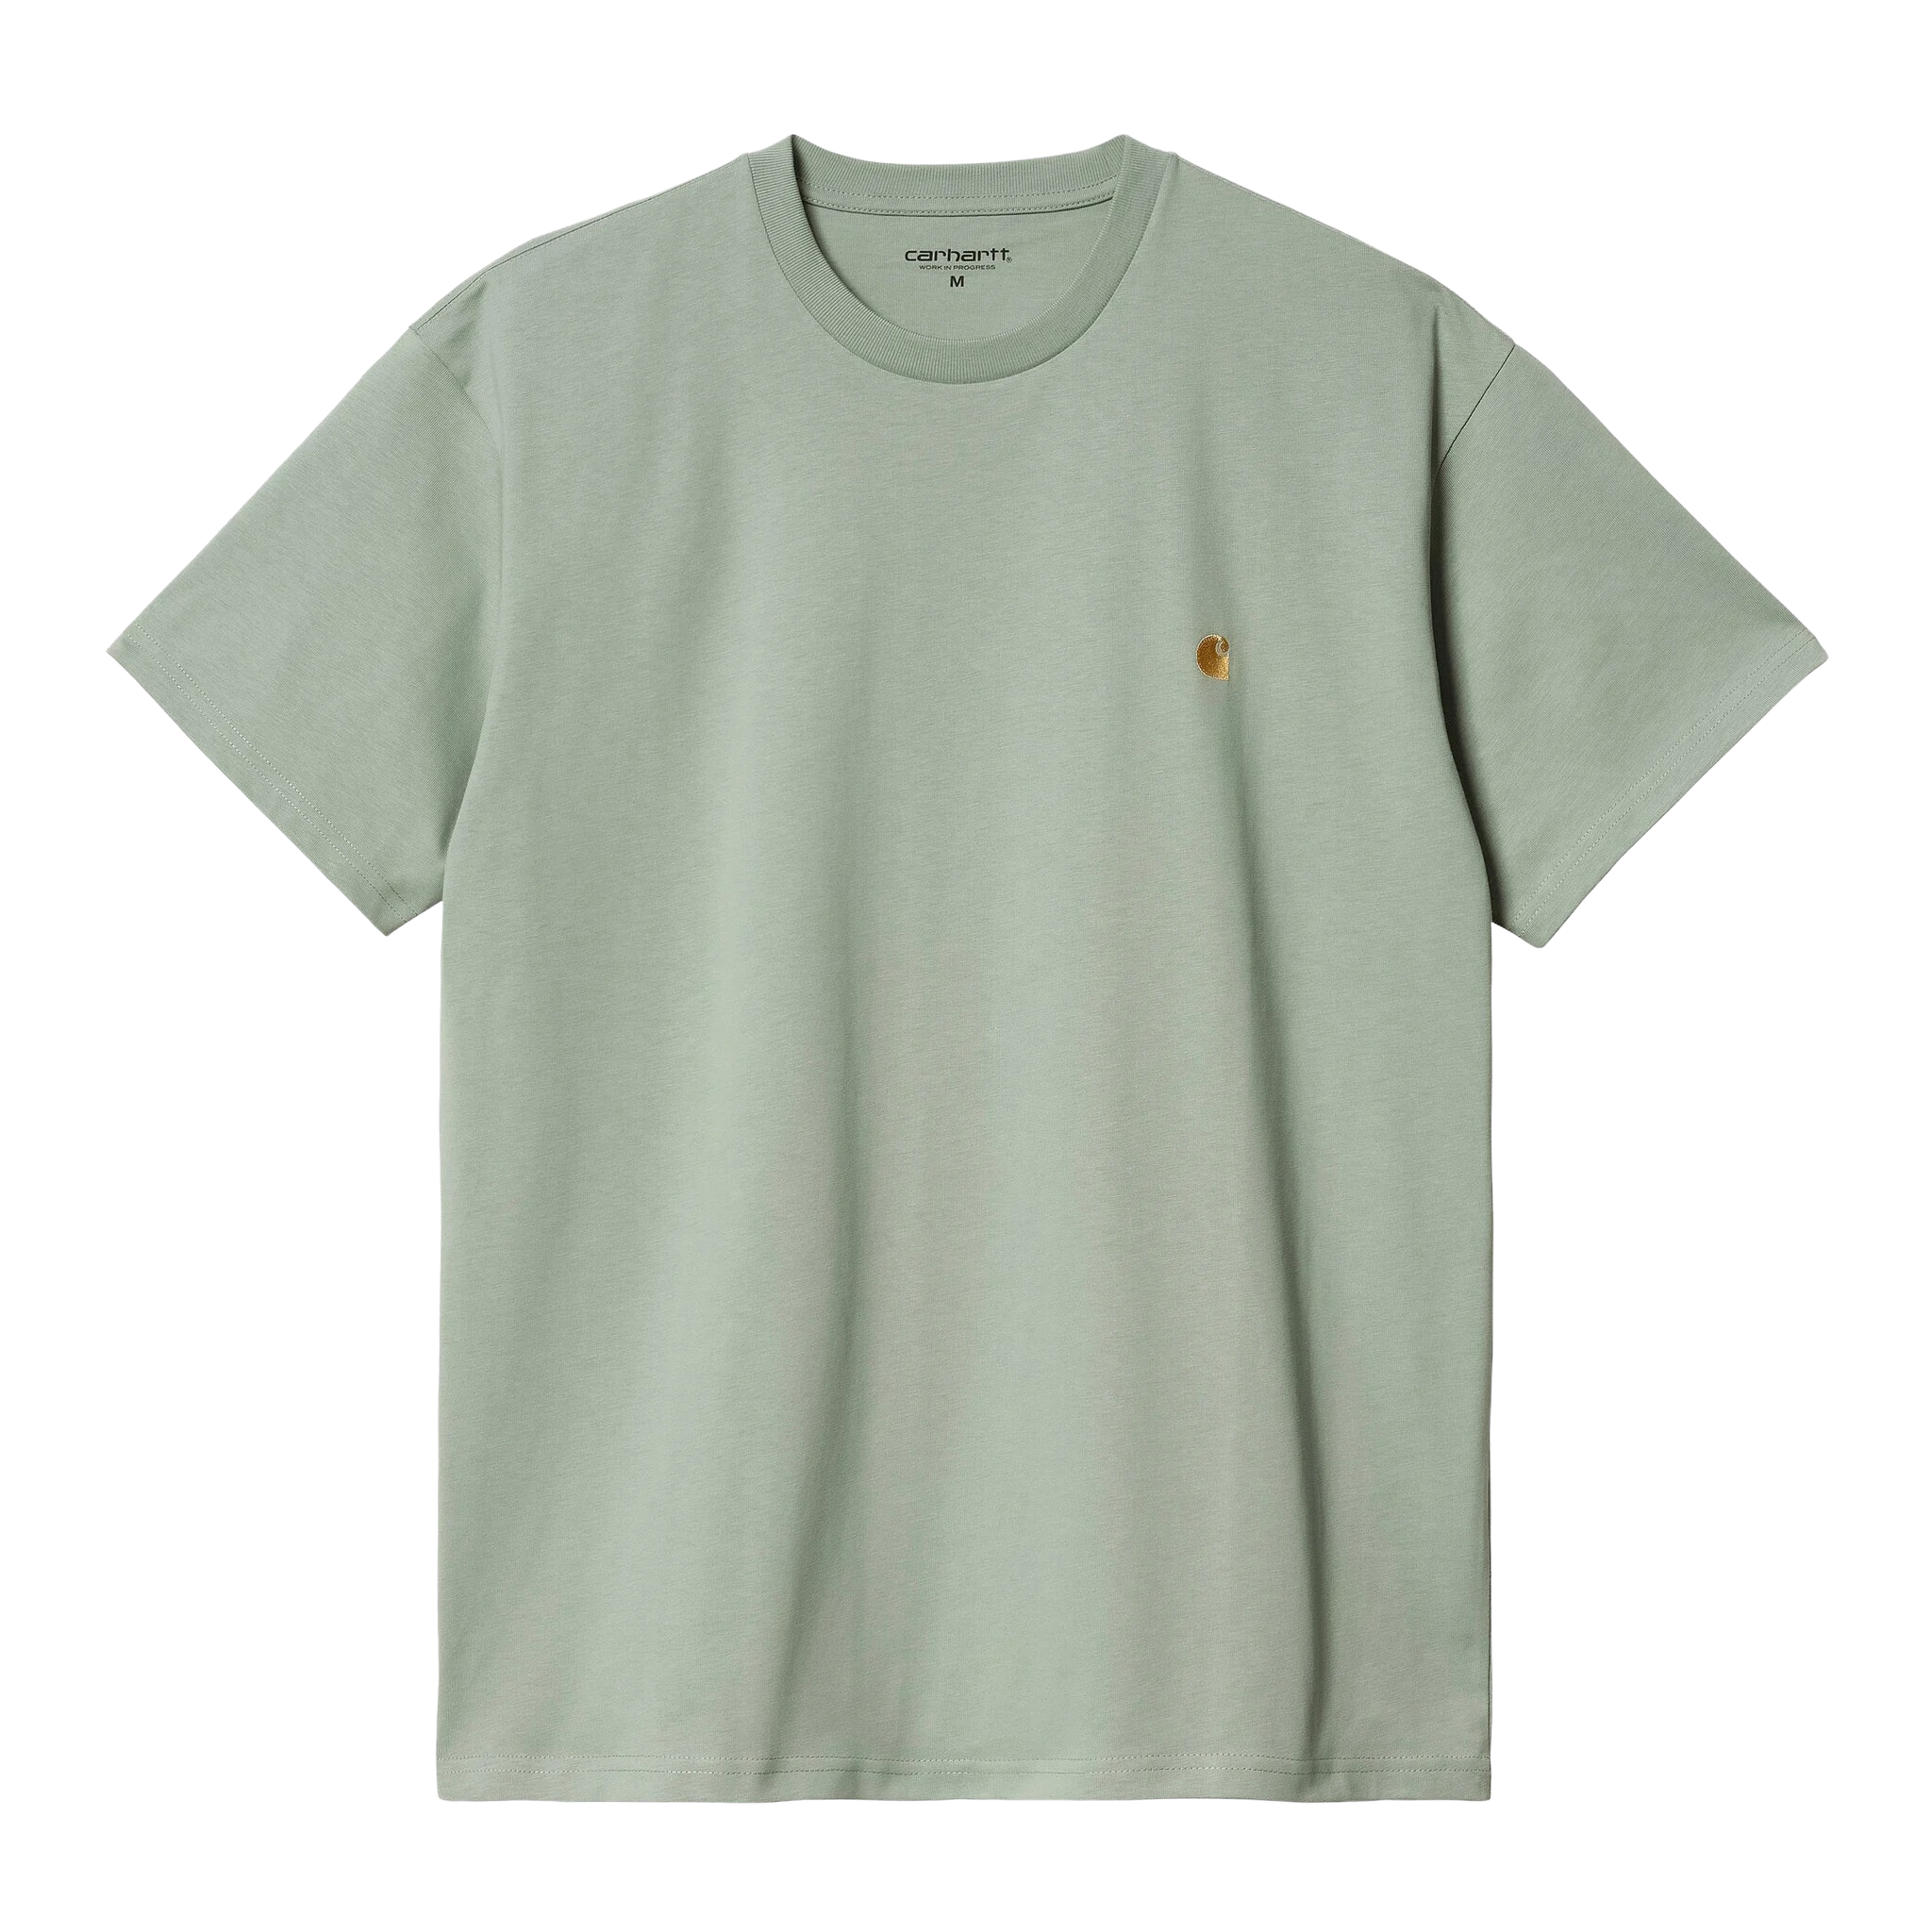 Carhartt WIP S/S Chase T-Shirt - Glassy Teal/Gold